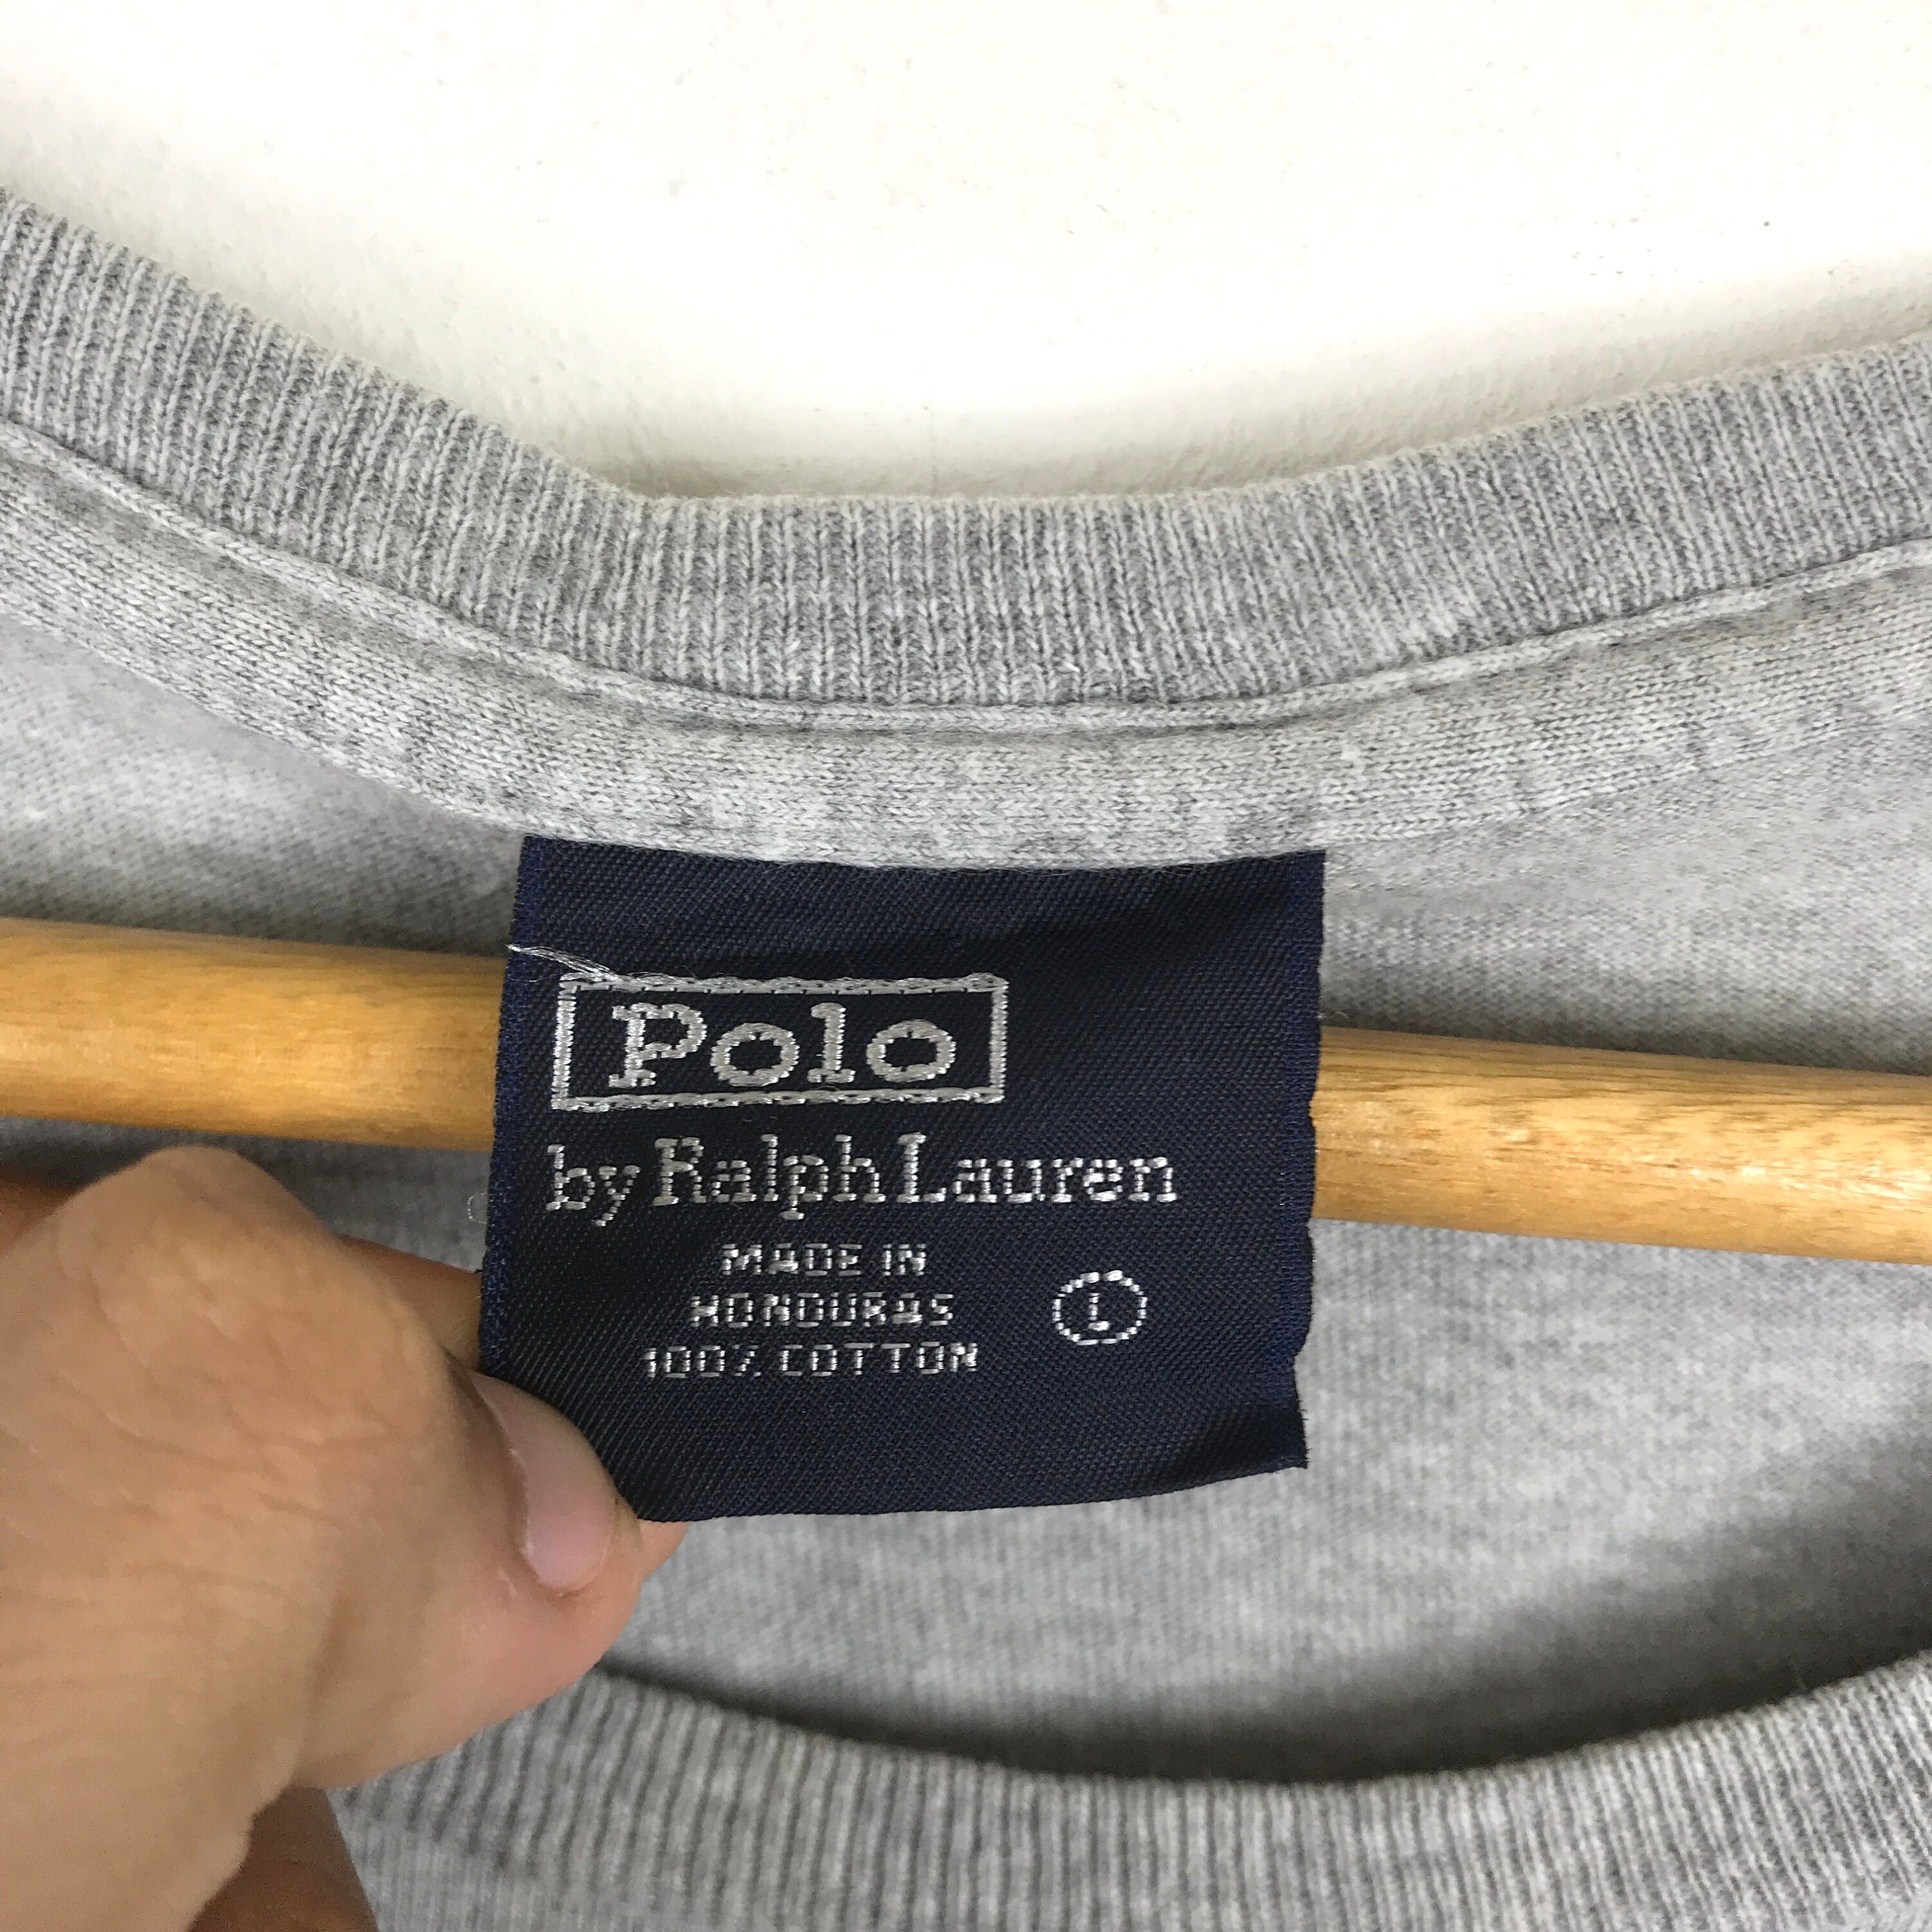 Lolife Vintage POLO BEAR RL by Ralph Lauren Playing Tennis - Etsy